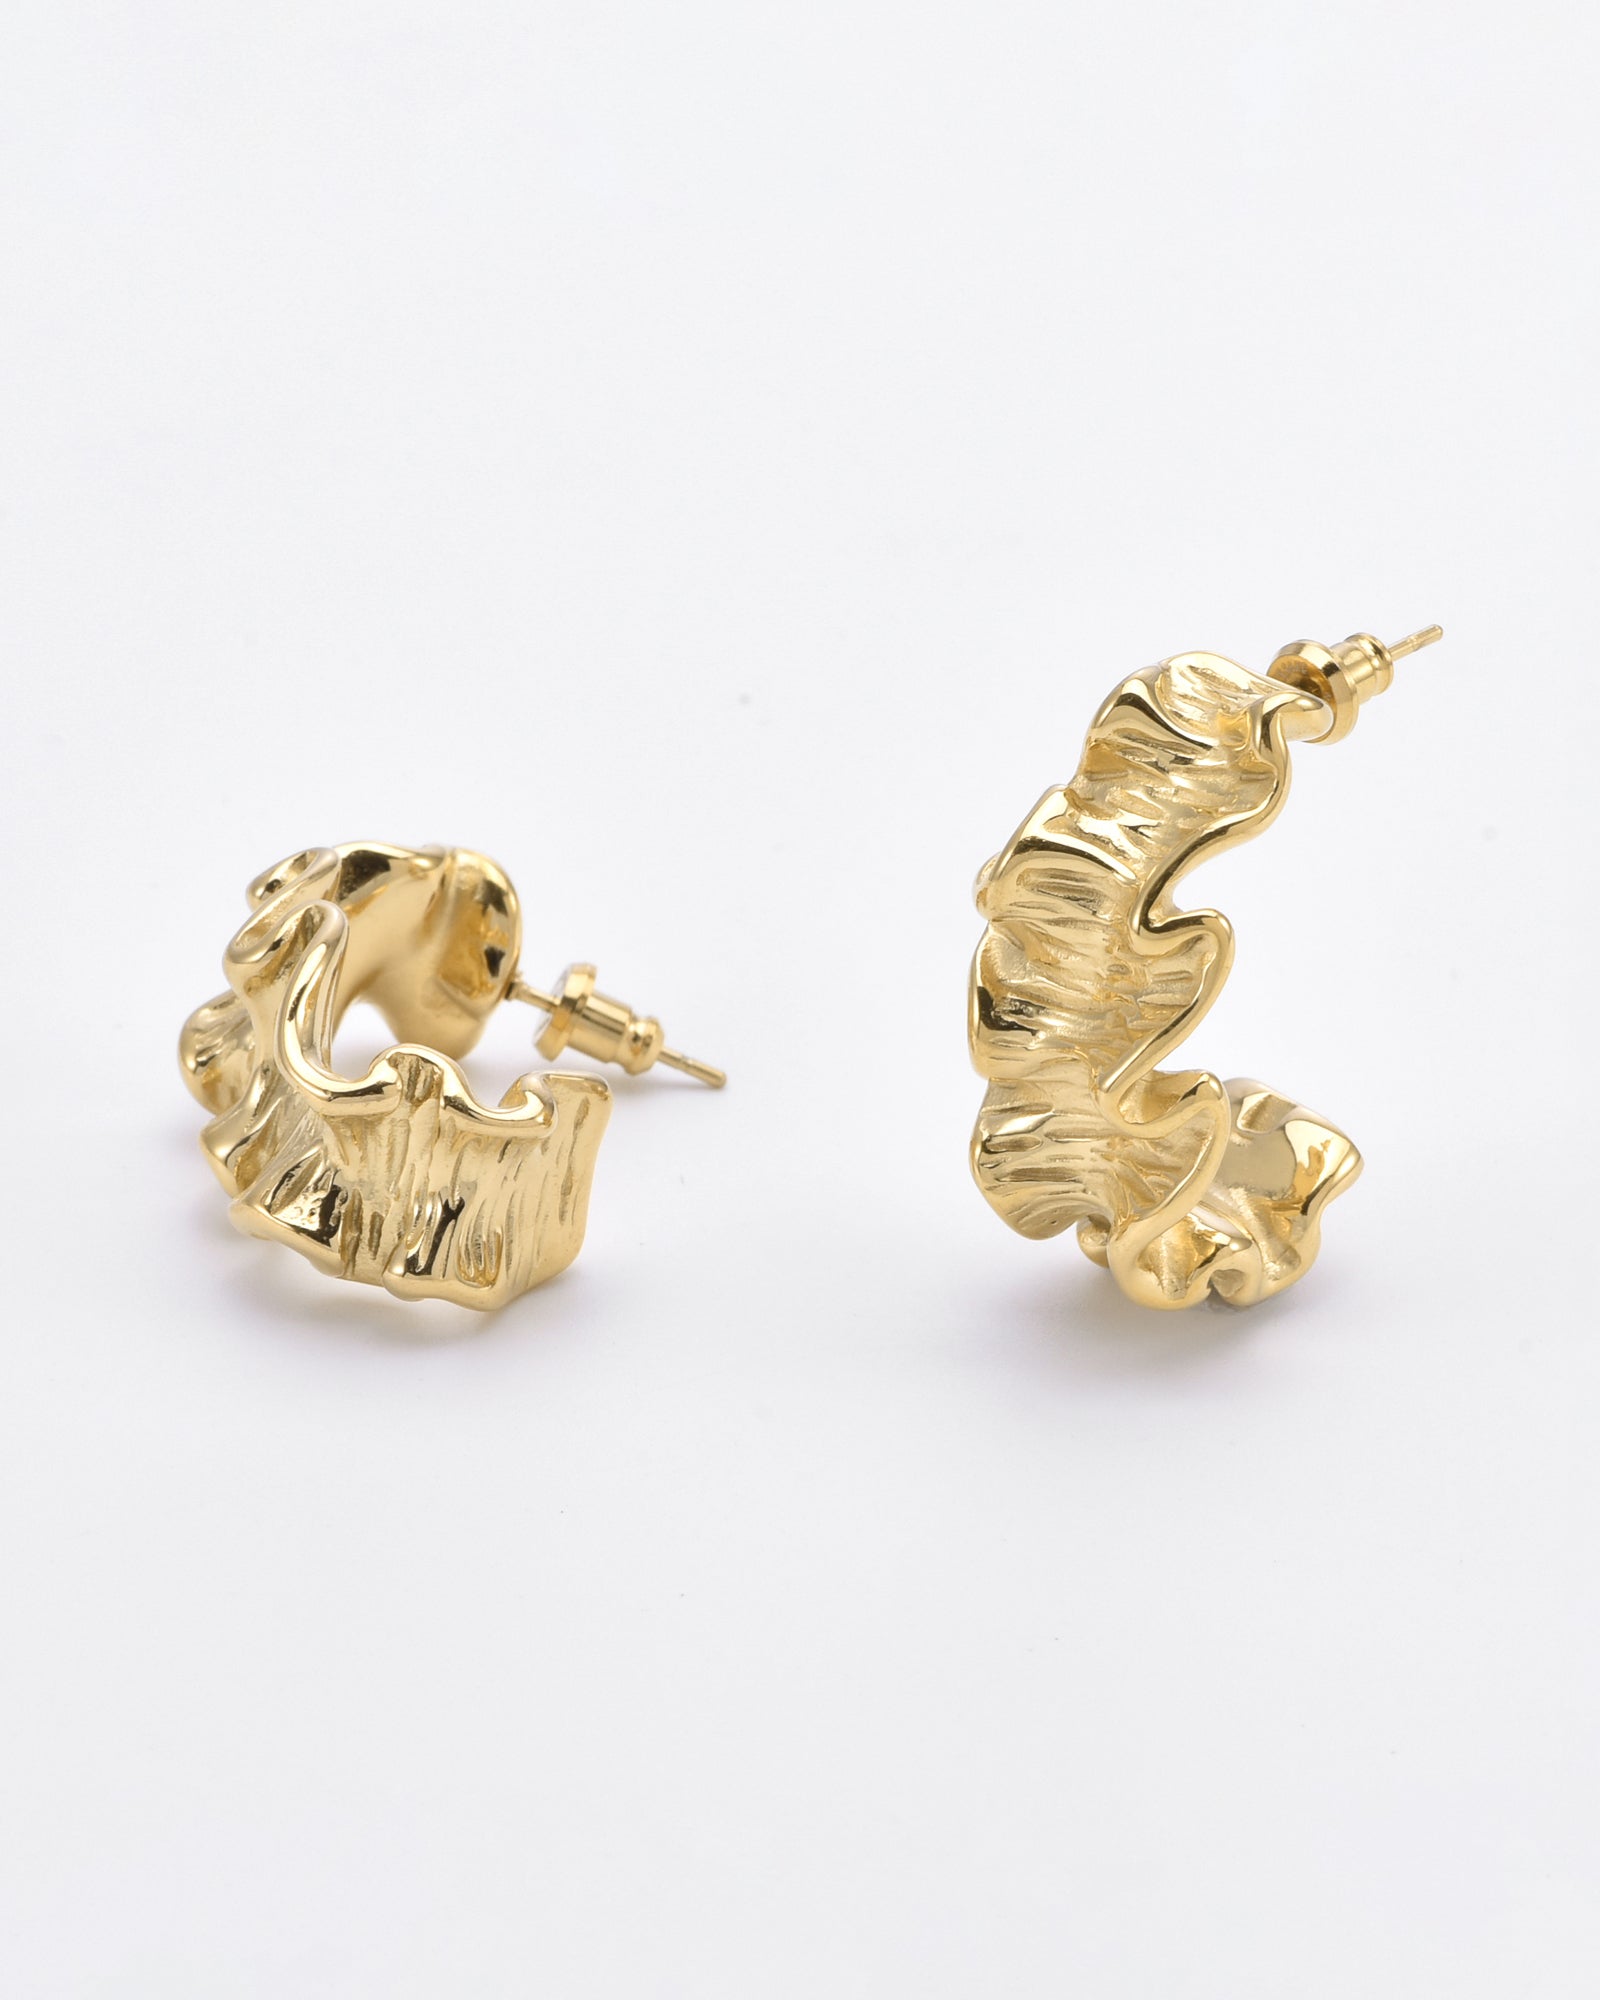 A pair of For Art's Sake® Athena Earrings Gold with a ribbon-inspired silhouette features a unique, textured, ruffled design. One earring is lying flat while the other is standing upright, both resting on a plain white surface, showcasing their elegant design in 24k gold.